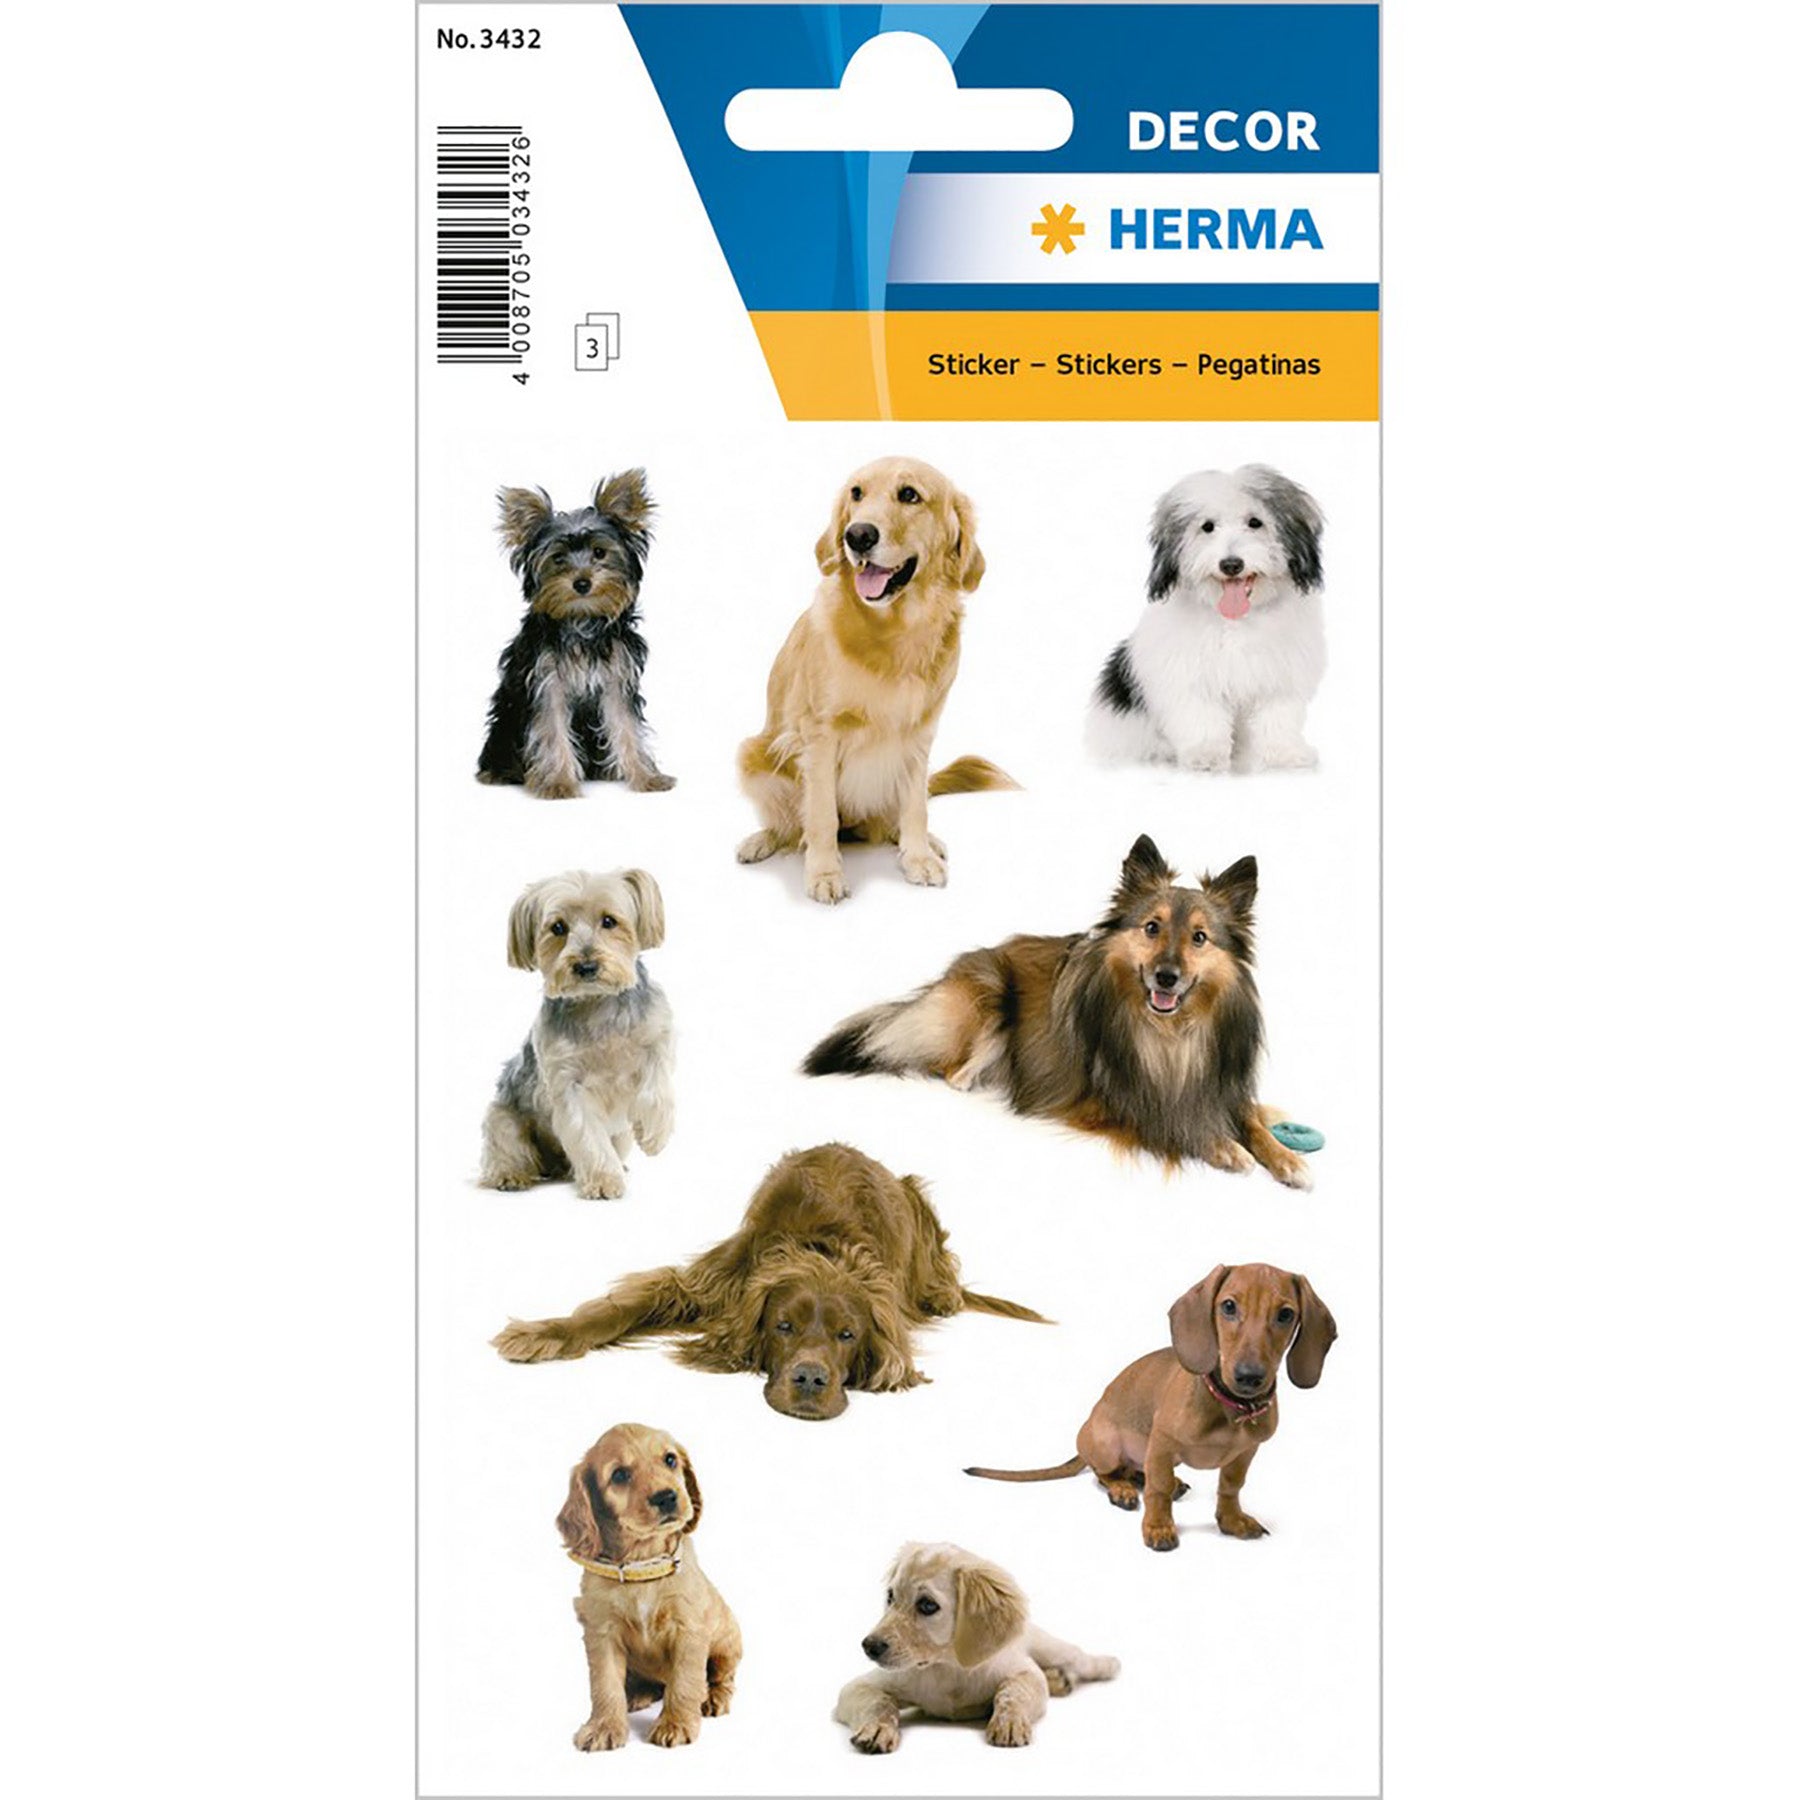 Herma Decor 3 Sheets Stickers Dog Photos 4.75x3.1in Sheet